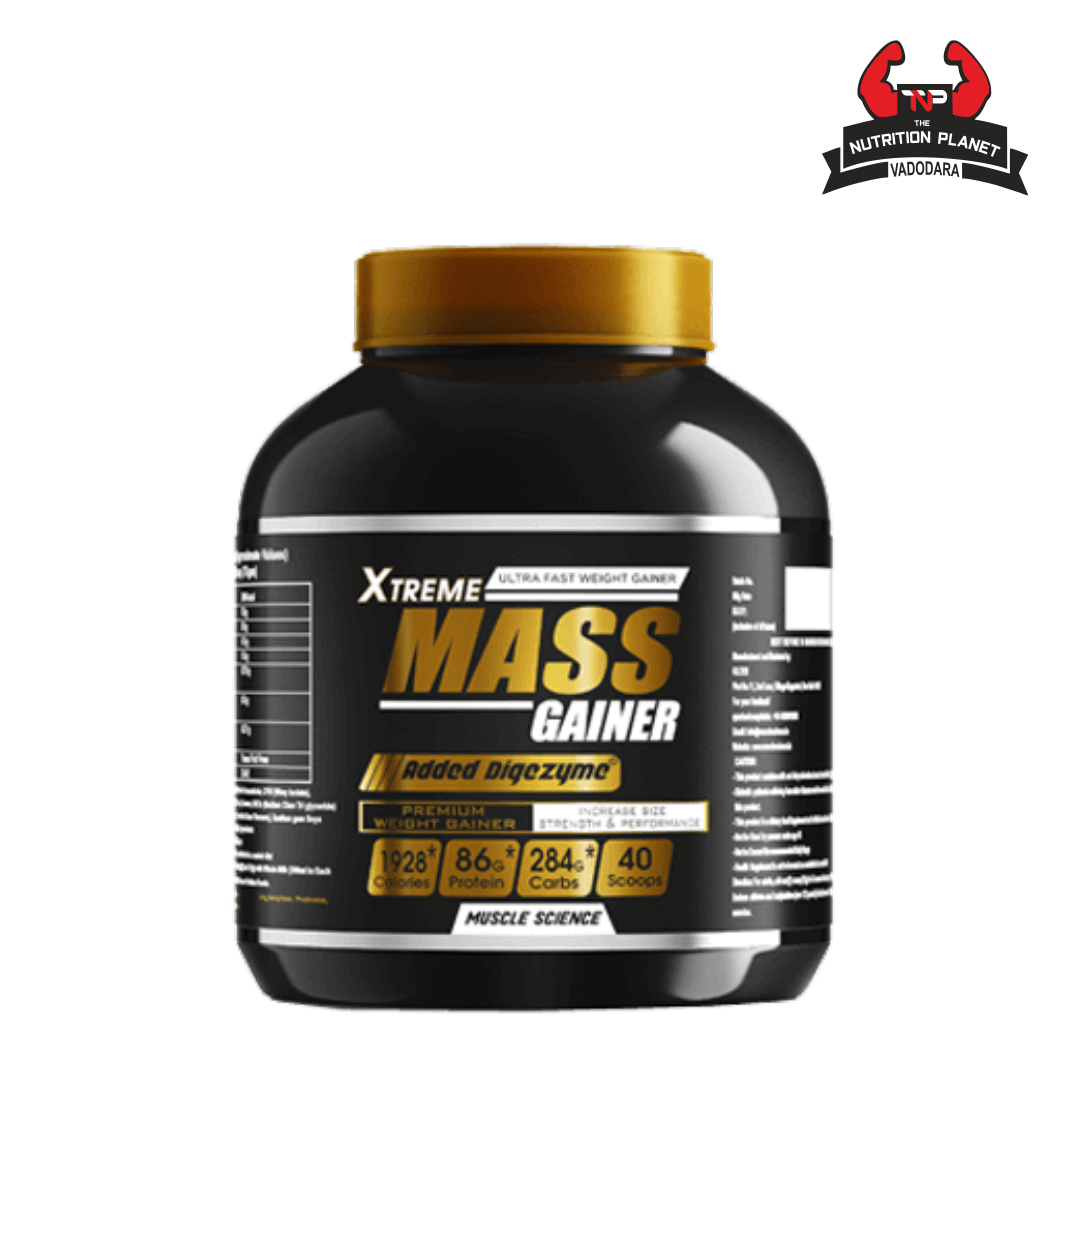 Muscle Science Xtreme Mass Gainer - 3KG with official authentic tag